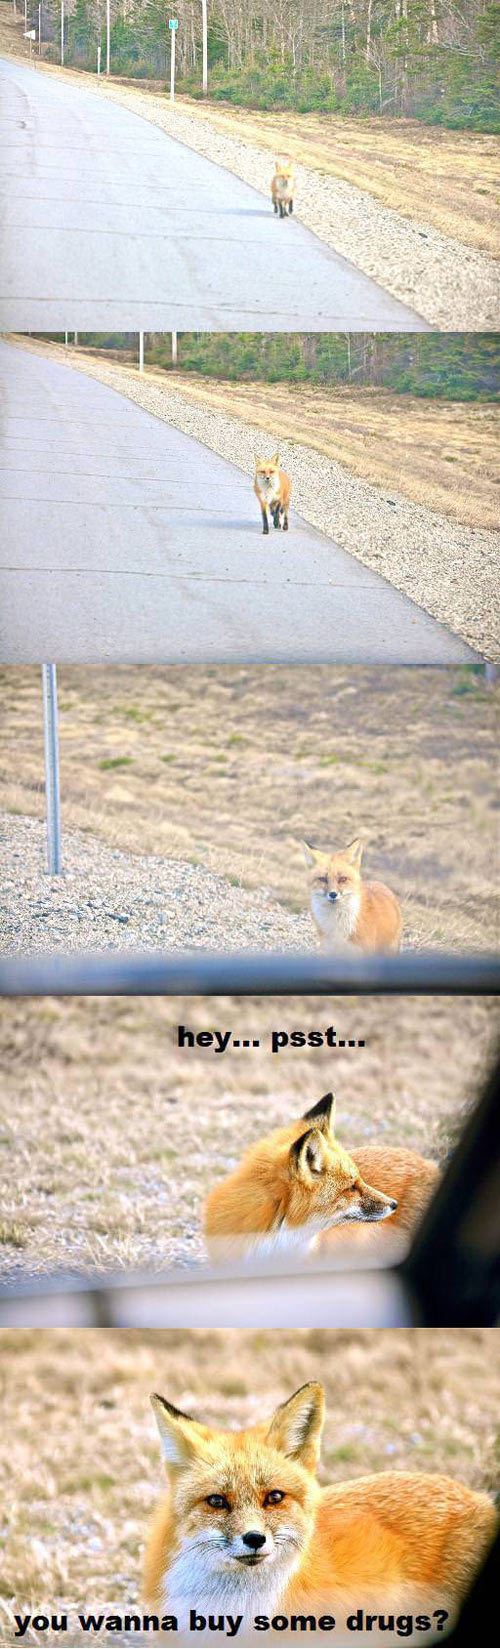 So that’s what the fox says…